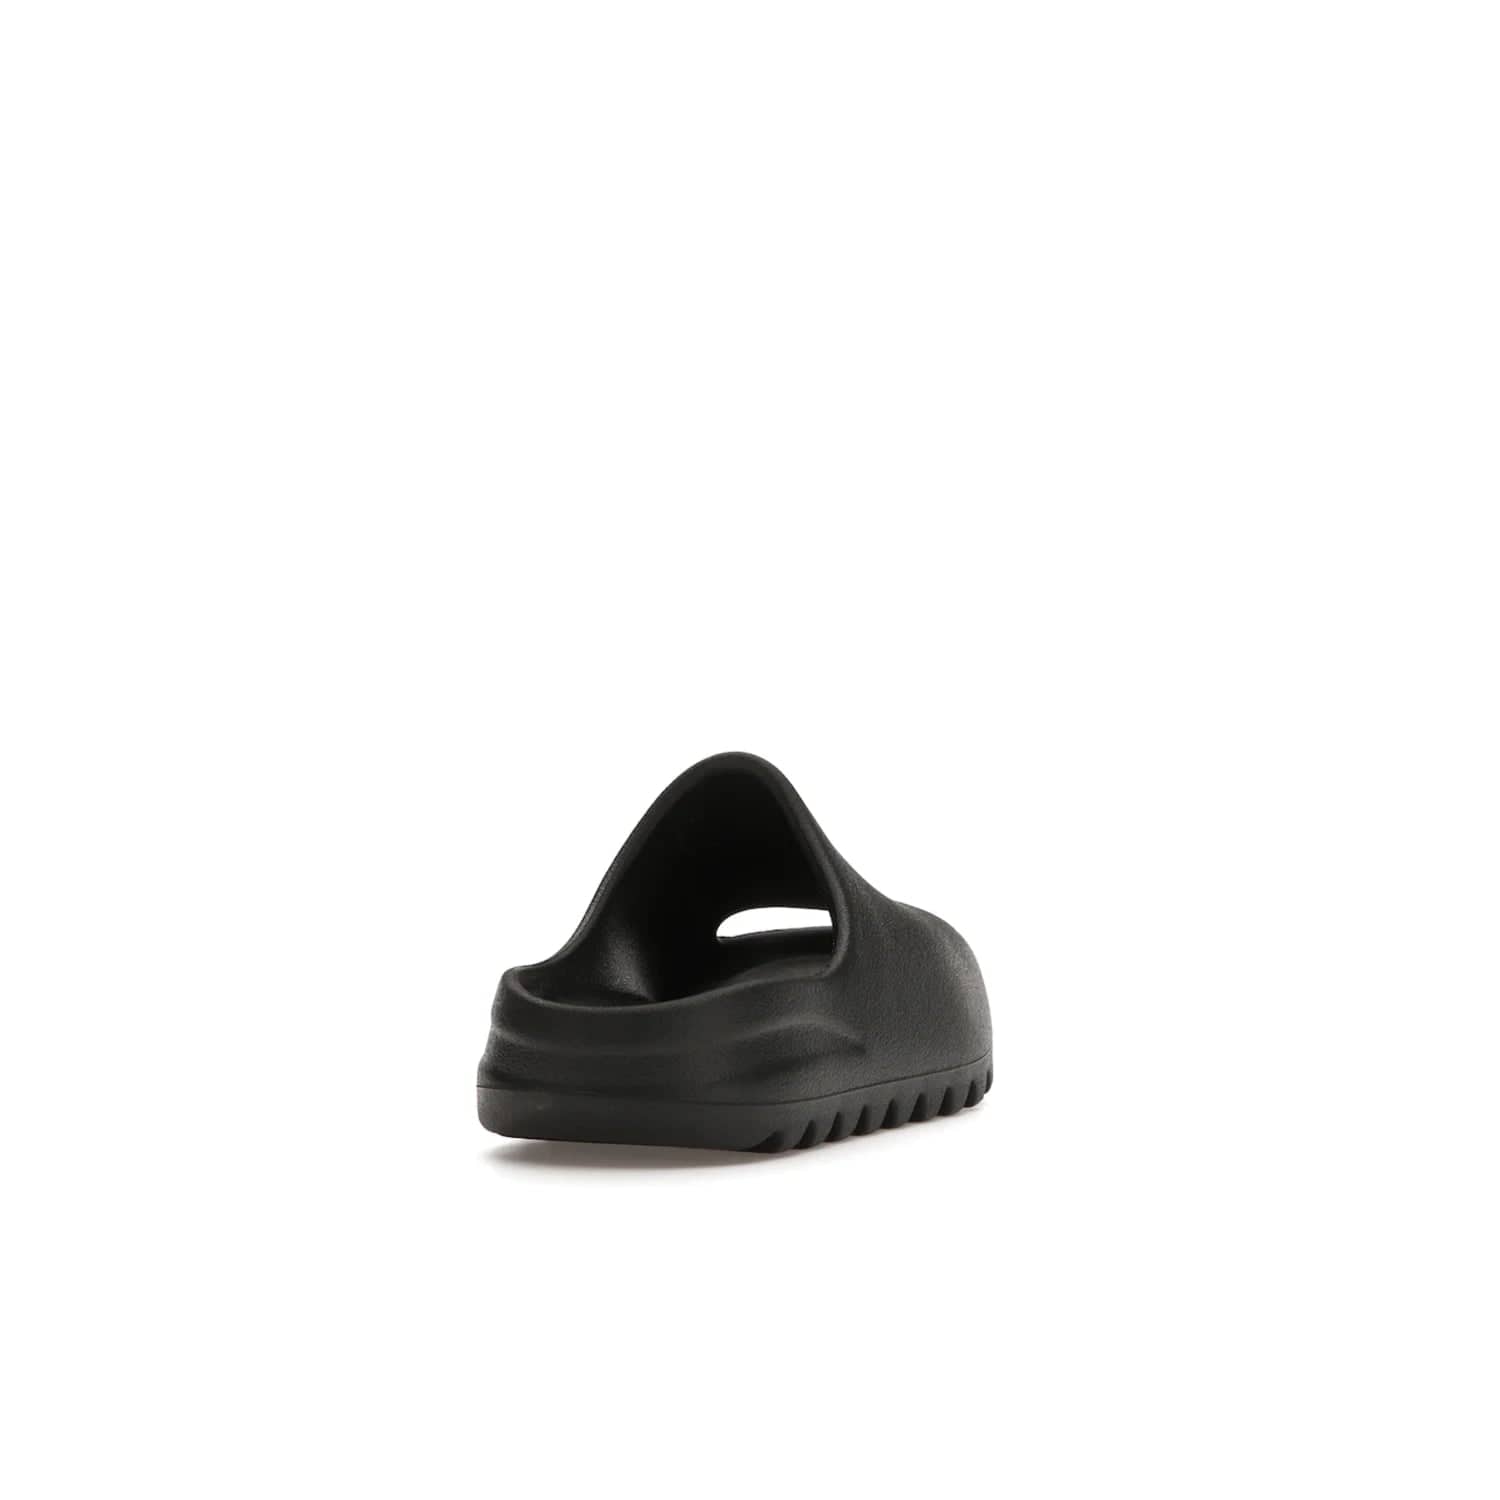 adidas Yeezy Slide Onyx (Kids) - Image 30 - Only at www.BallersClubKickz.com - adidas Yeezy Slide Onyx (Kids): Comfortable foam construction with textured surface and iconic three-stripe logo. Breathable, open-toe design and deep grooves for traction. Released in March 2021 at $50.